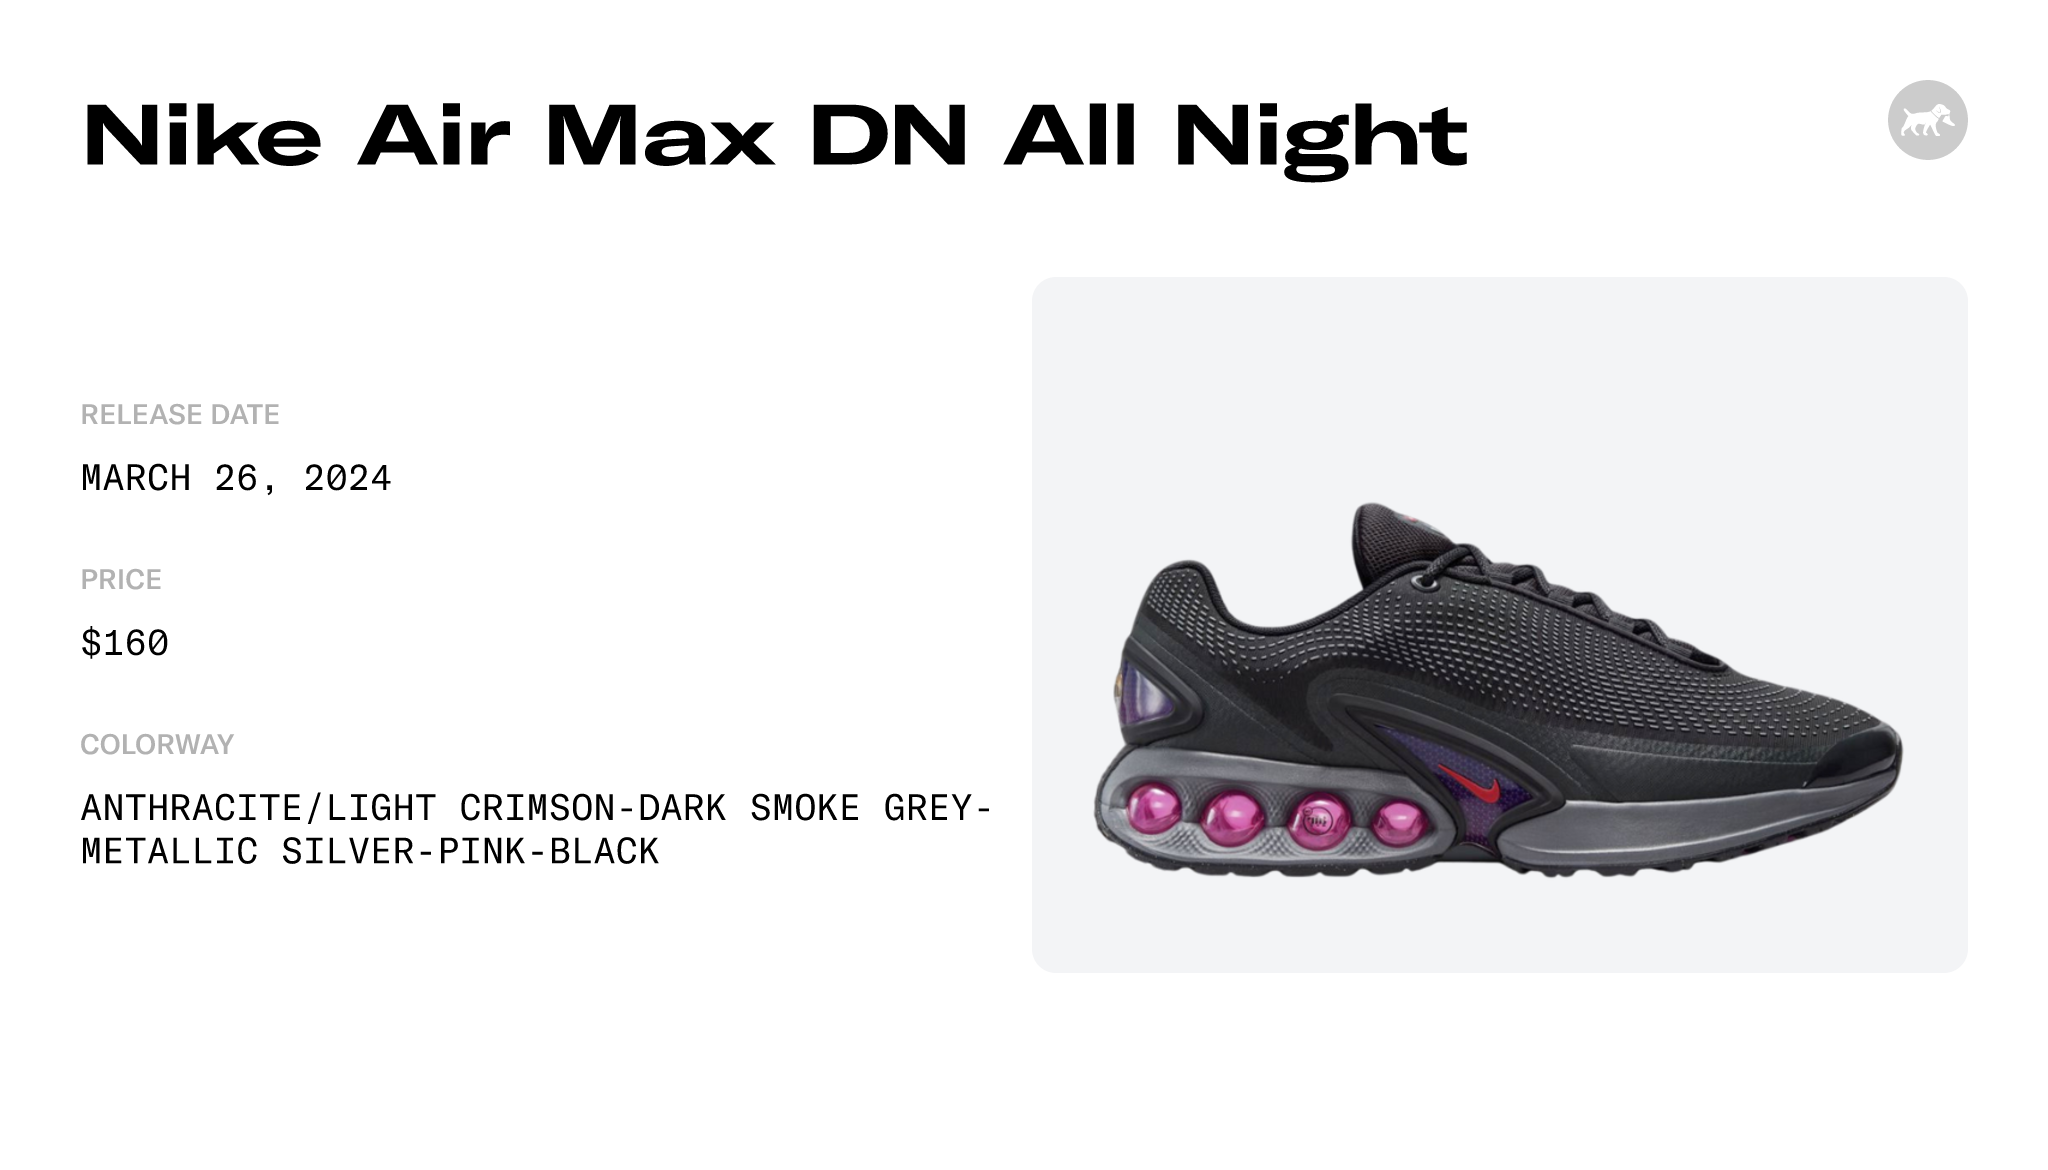 Nike Air Max DN All Night - DV3337-008 Raffles and Release Date